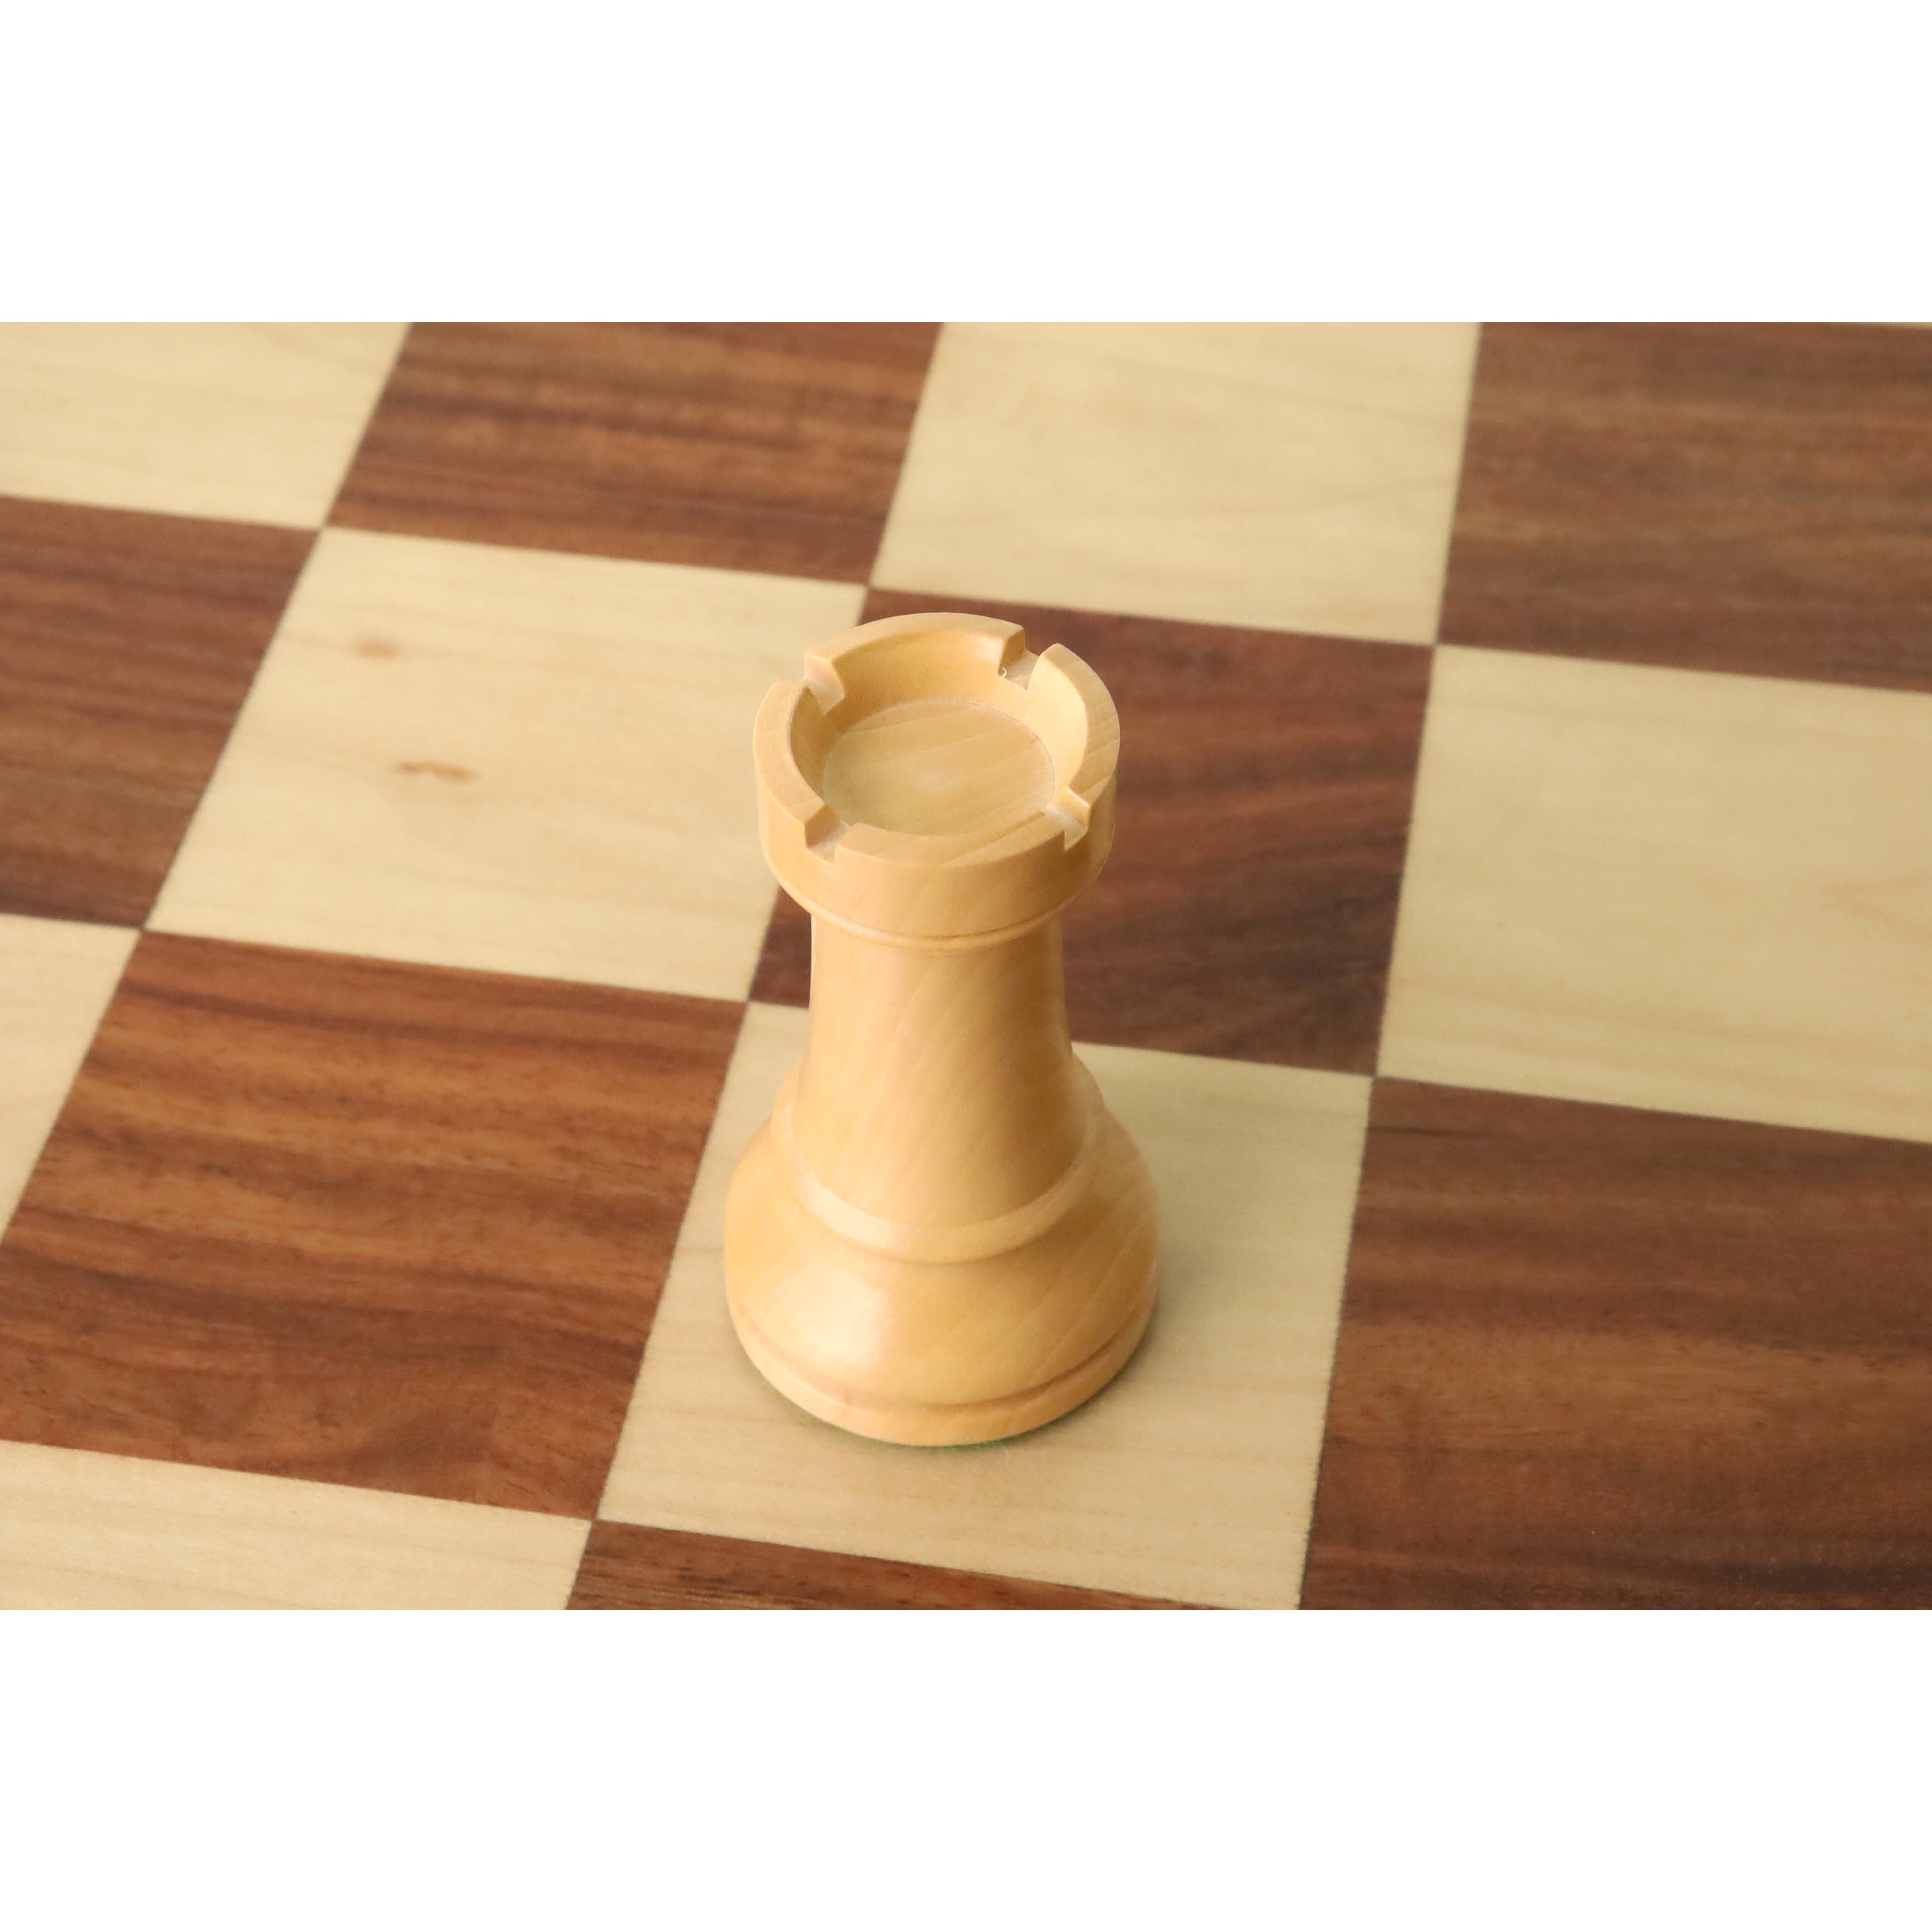 10 Chess Sets Worthy of a Grandmaster